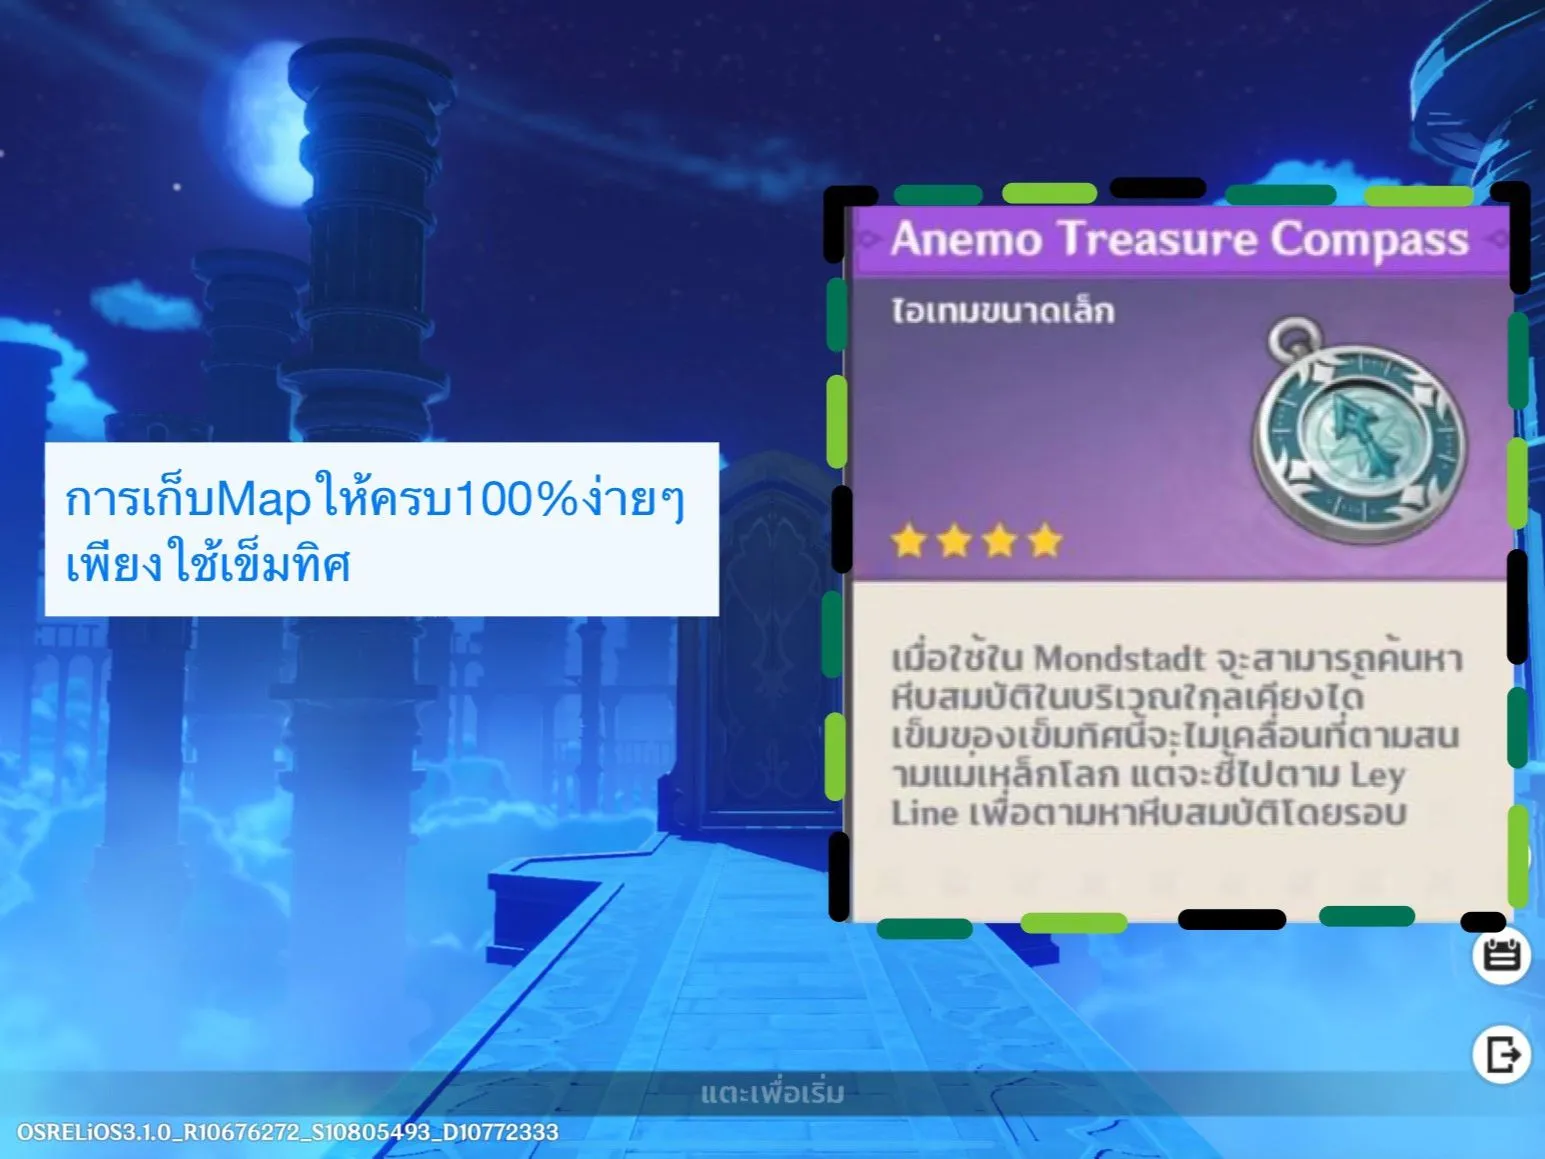 How To Craft And Use The Anemo Treasure Compass